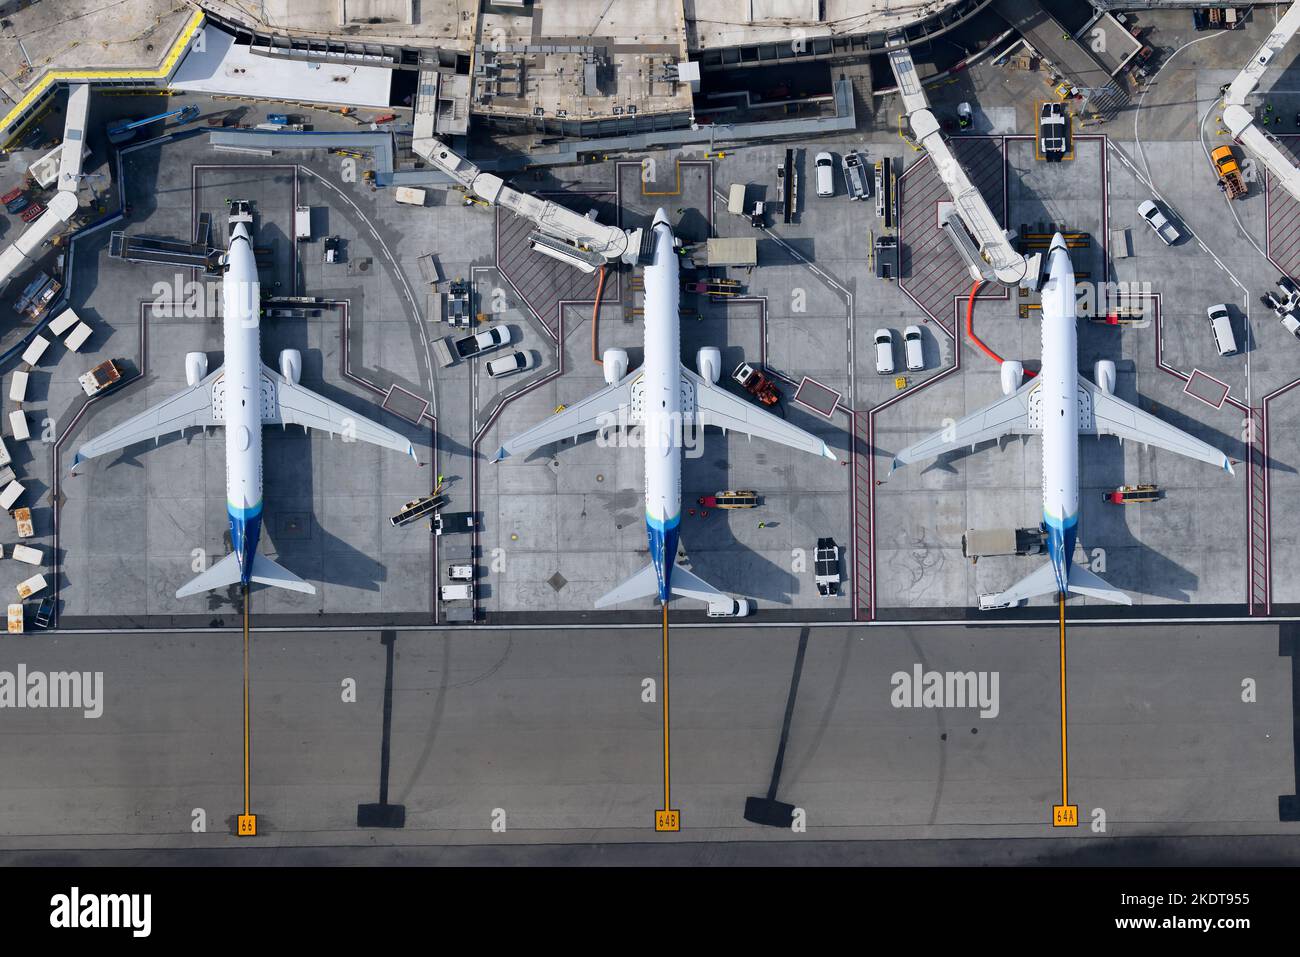 Top down view of Alaska Airlines Boeing 737 aircraft at Los Angeles International Airport Terminal 6. Aerial view of Alaska Airlines 737 airplanes. Stock Photo